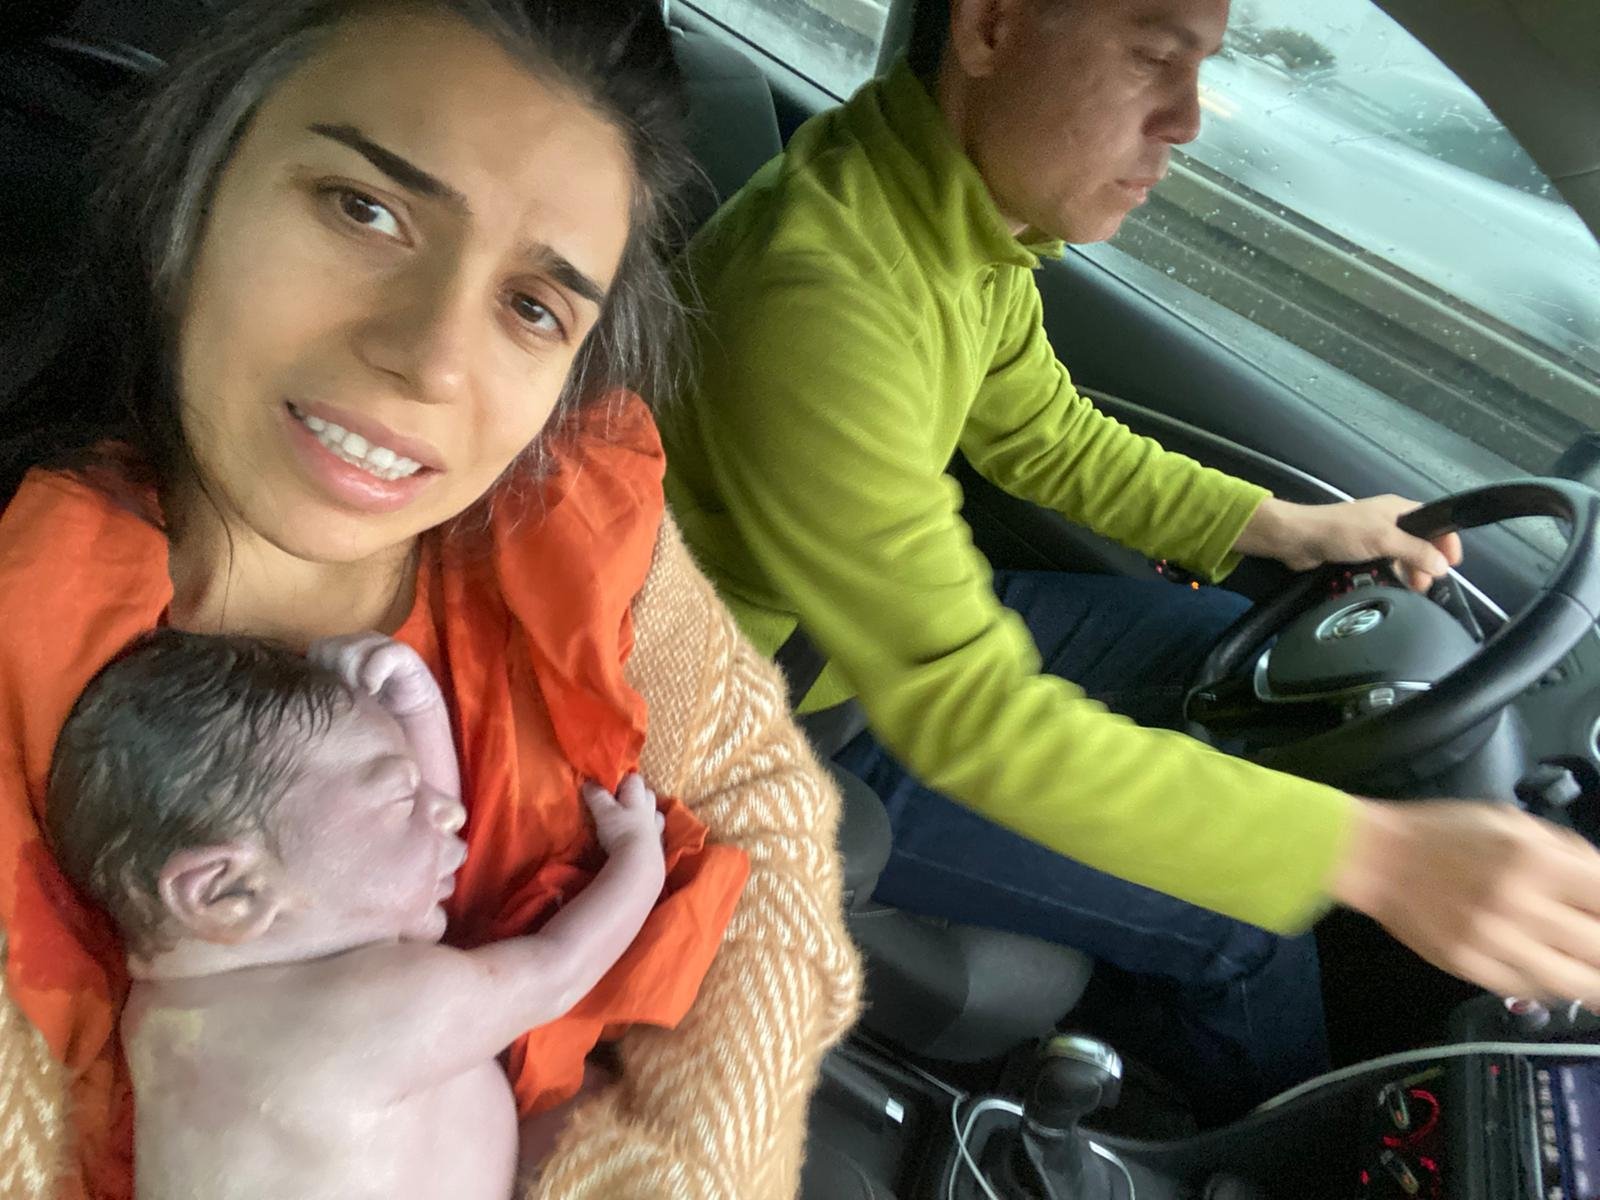 Mother Seda Giray (L) poses for a selfie with her newborn son Devin Ege as her husband Deniz drives to the hospital, in Istanbul, Turkey, March 24, 2021. (DHA Photo)